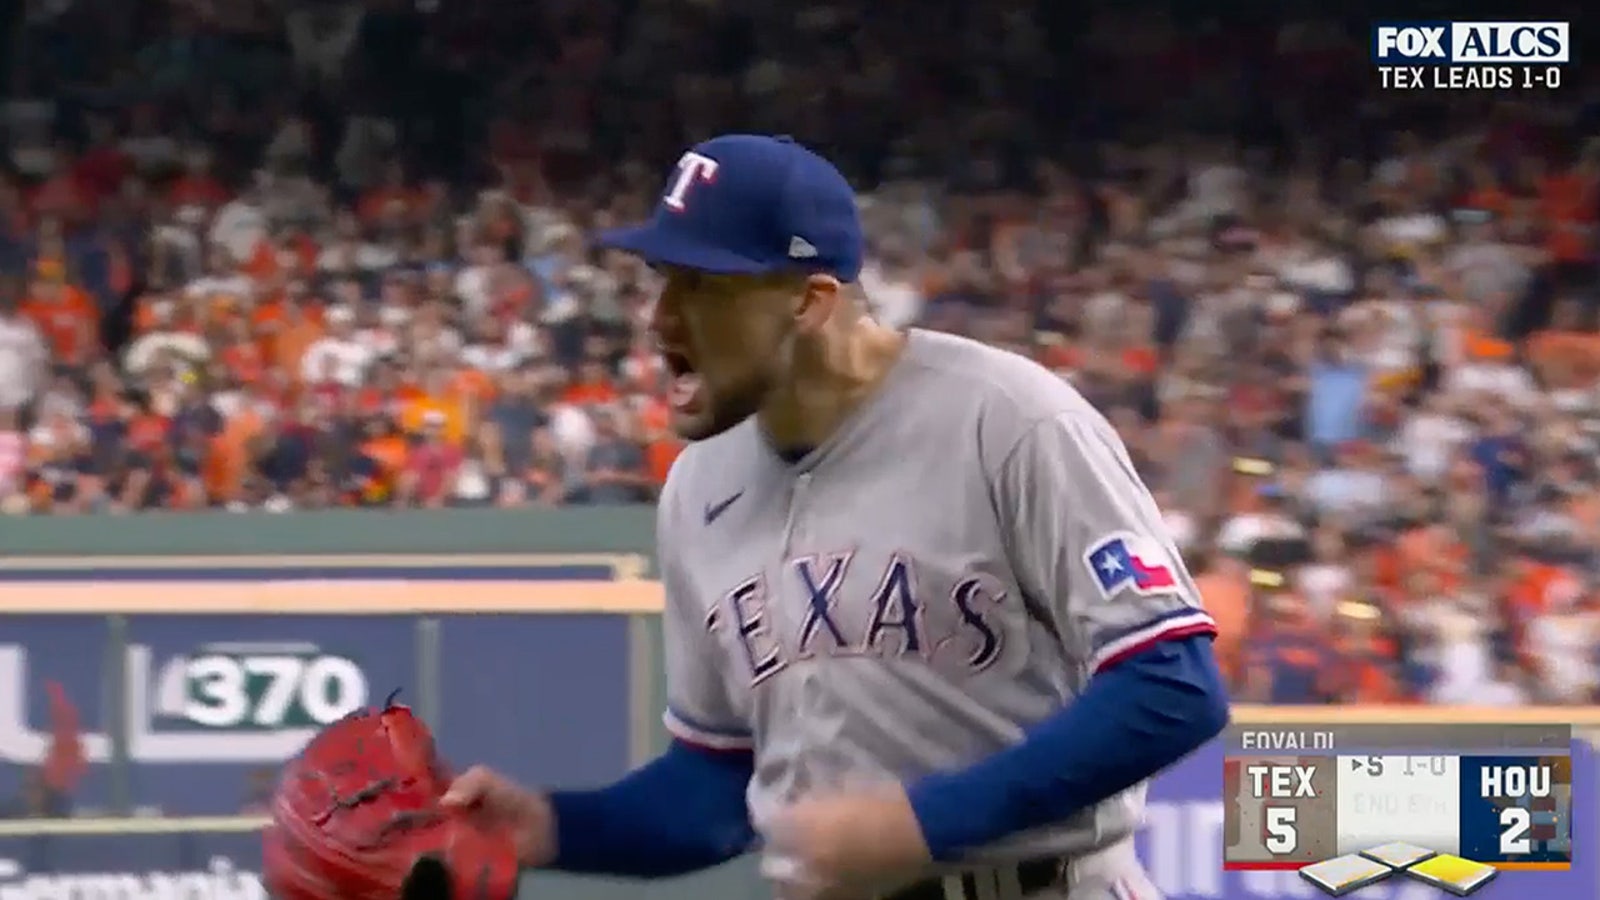 ‘True competitor’ Nathan Eovaldi kept Astros at bay and reinforced Rangers’ belief